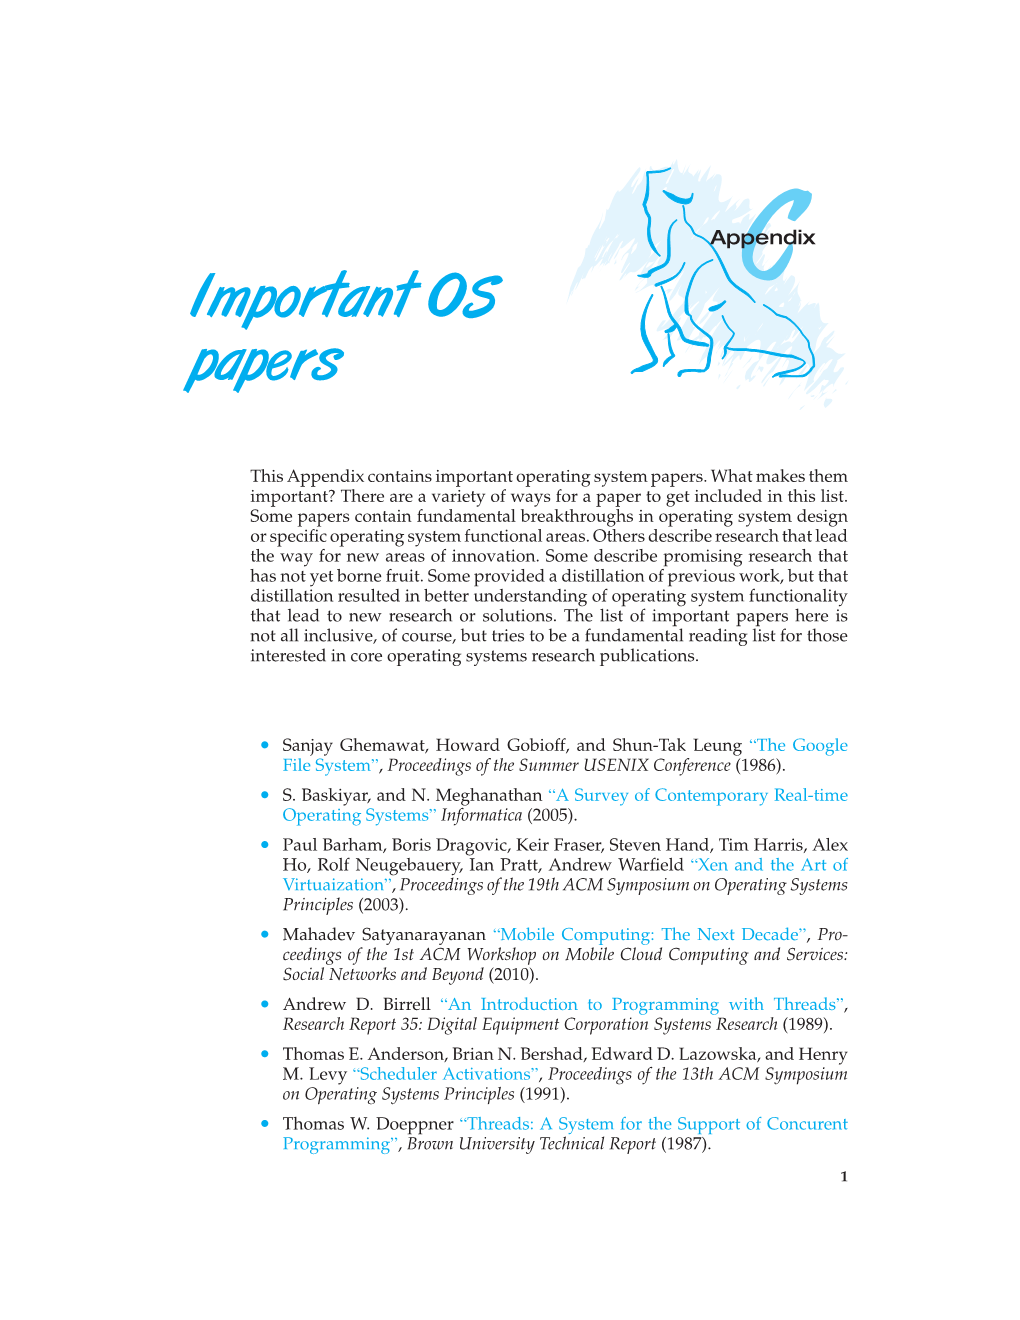 Important OS Papers